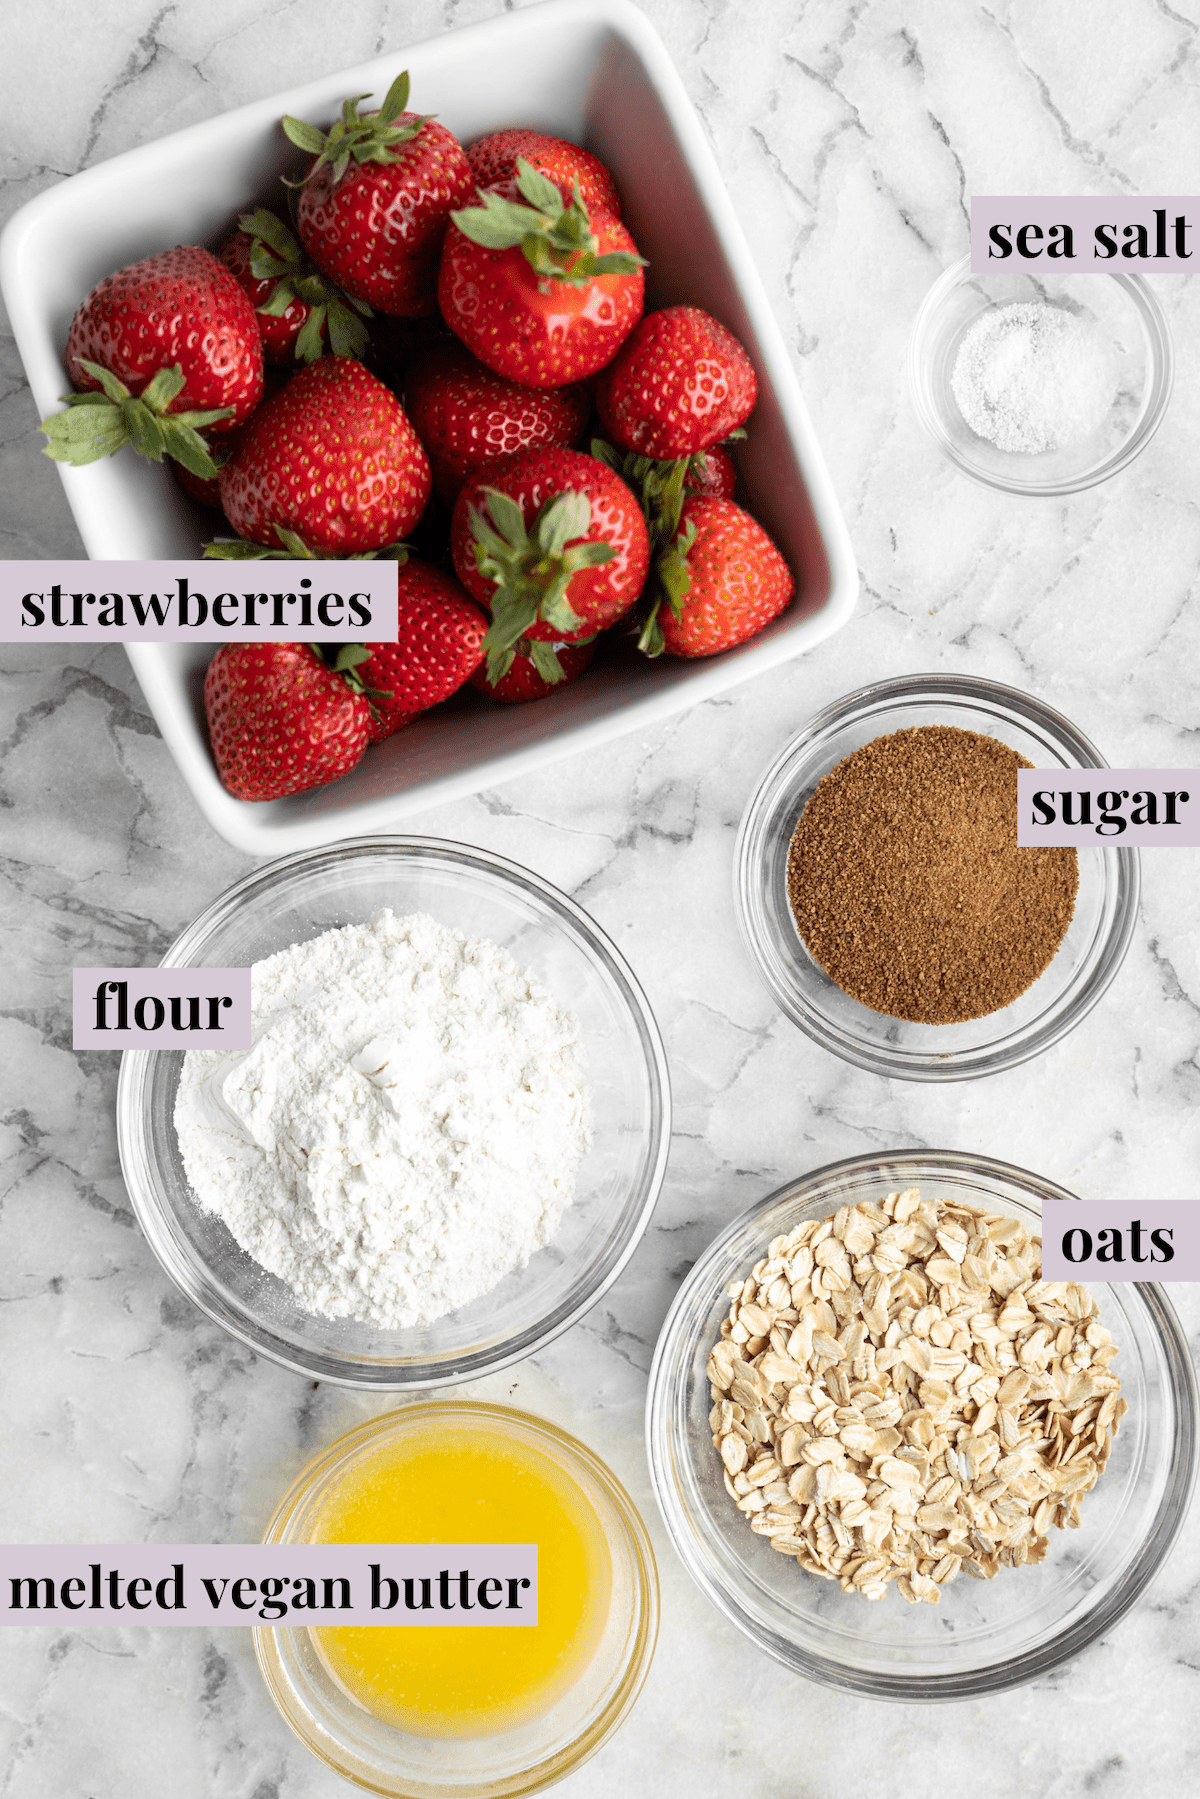 Overhead view of ingredients for strawberry crumble with labels